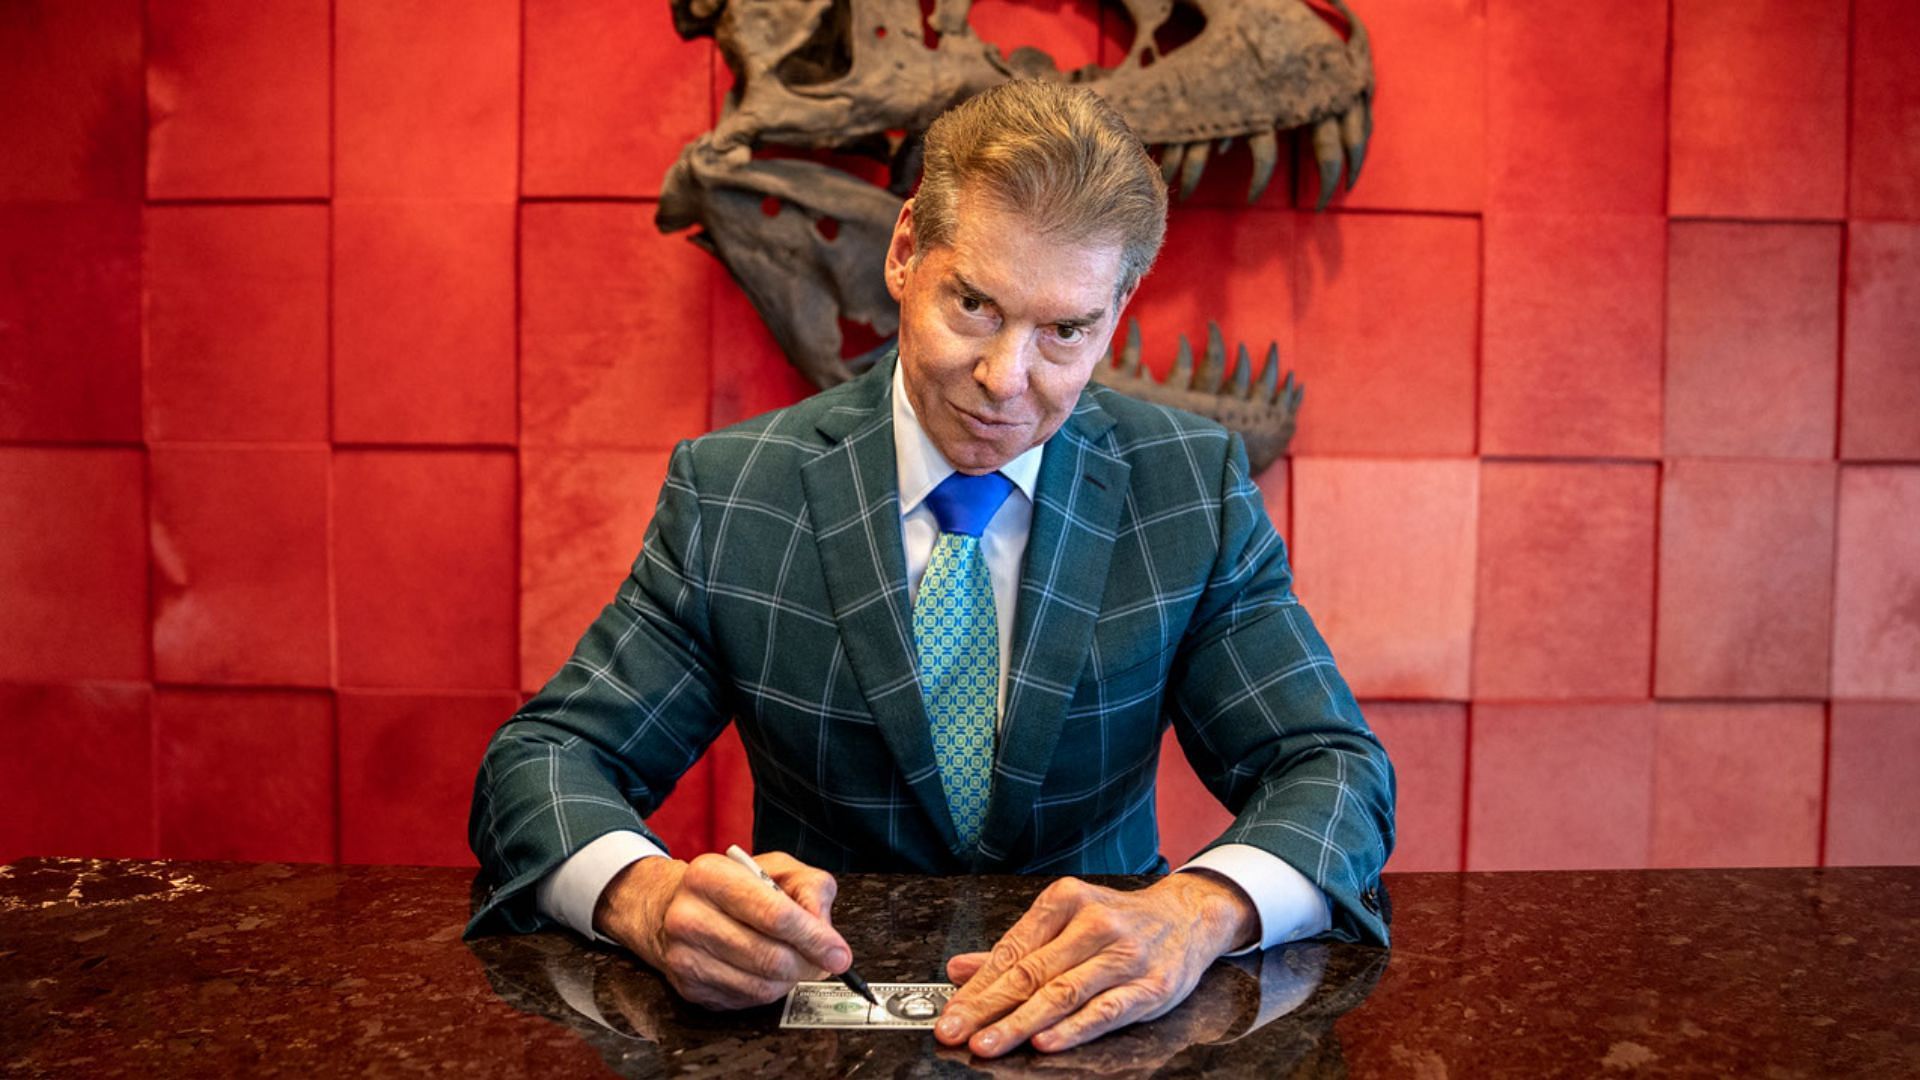 Vince McMahon kept an open-minded approach for a future sale